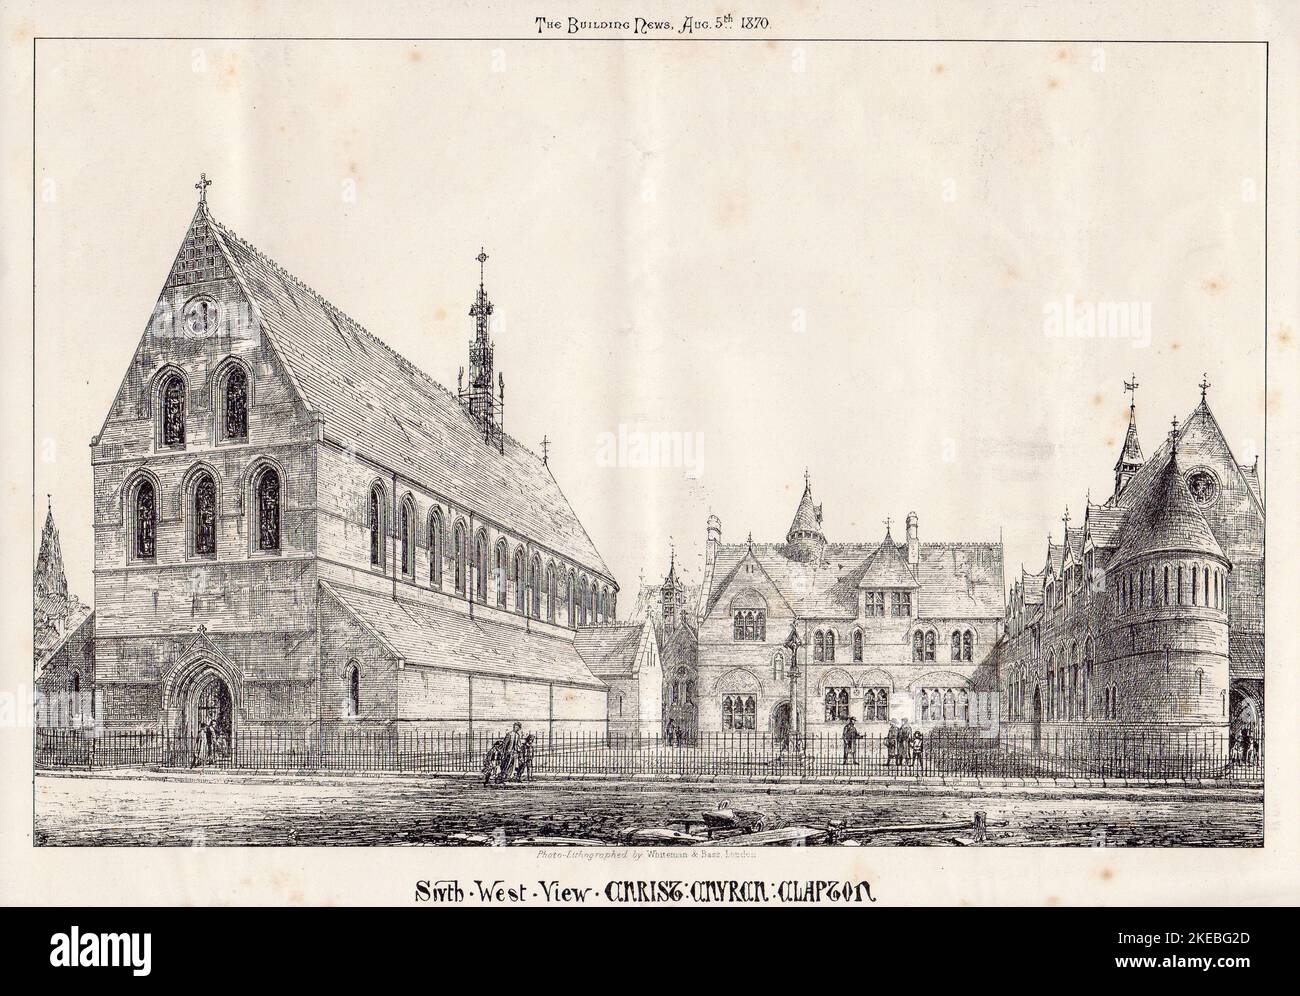 South West View of Christ Church, Kenninghall Road, Clapton, London, published inThe Building News magazine, 5th April 1870. Black and White Illustration/Engraving. This was never built, the commission eventually going to William Wiggington. The foundation stone for Christ Church was laid on 30th August 1870 and the building  consecrated by John Jackson the Bishop of London on 6th May 1871. The church was destroyed during German bombing raids in 1940, and finally demolished in around 1953. Stock Photo